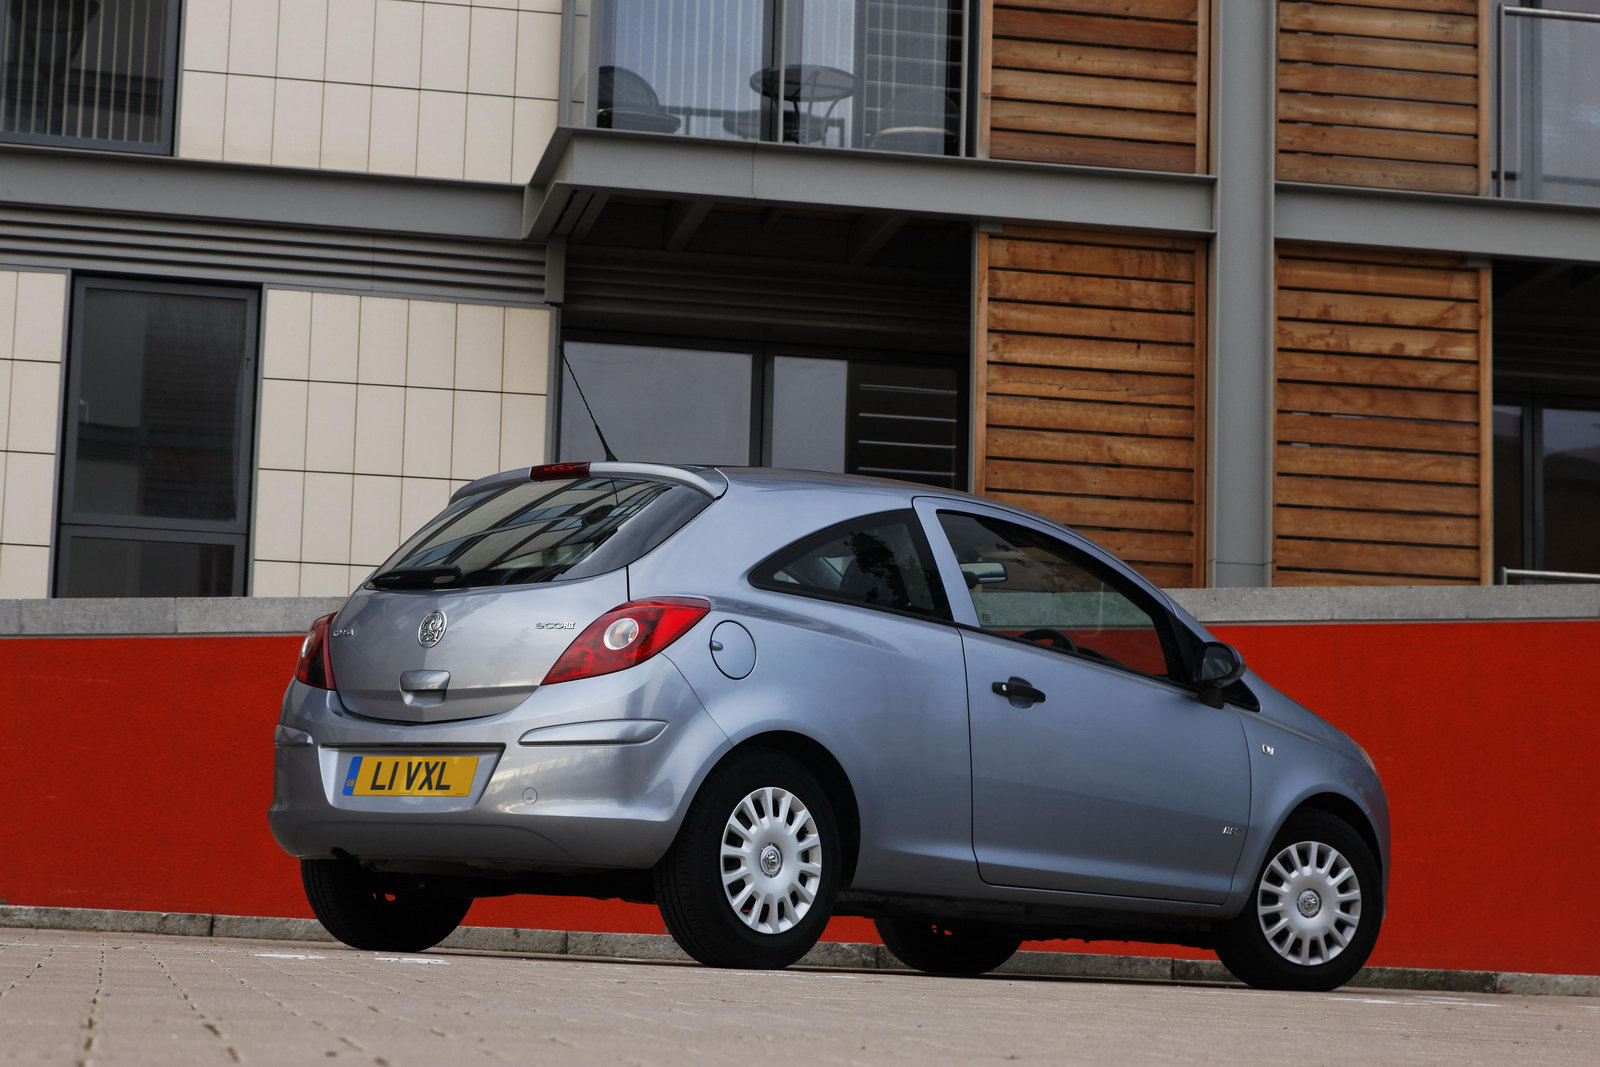 Vauxhall Corsa gets a 2010 eco facelift